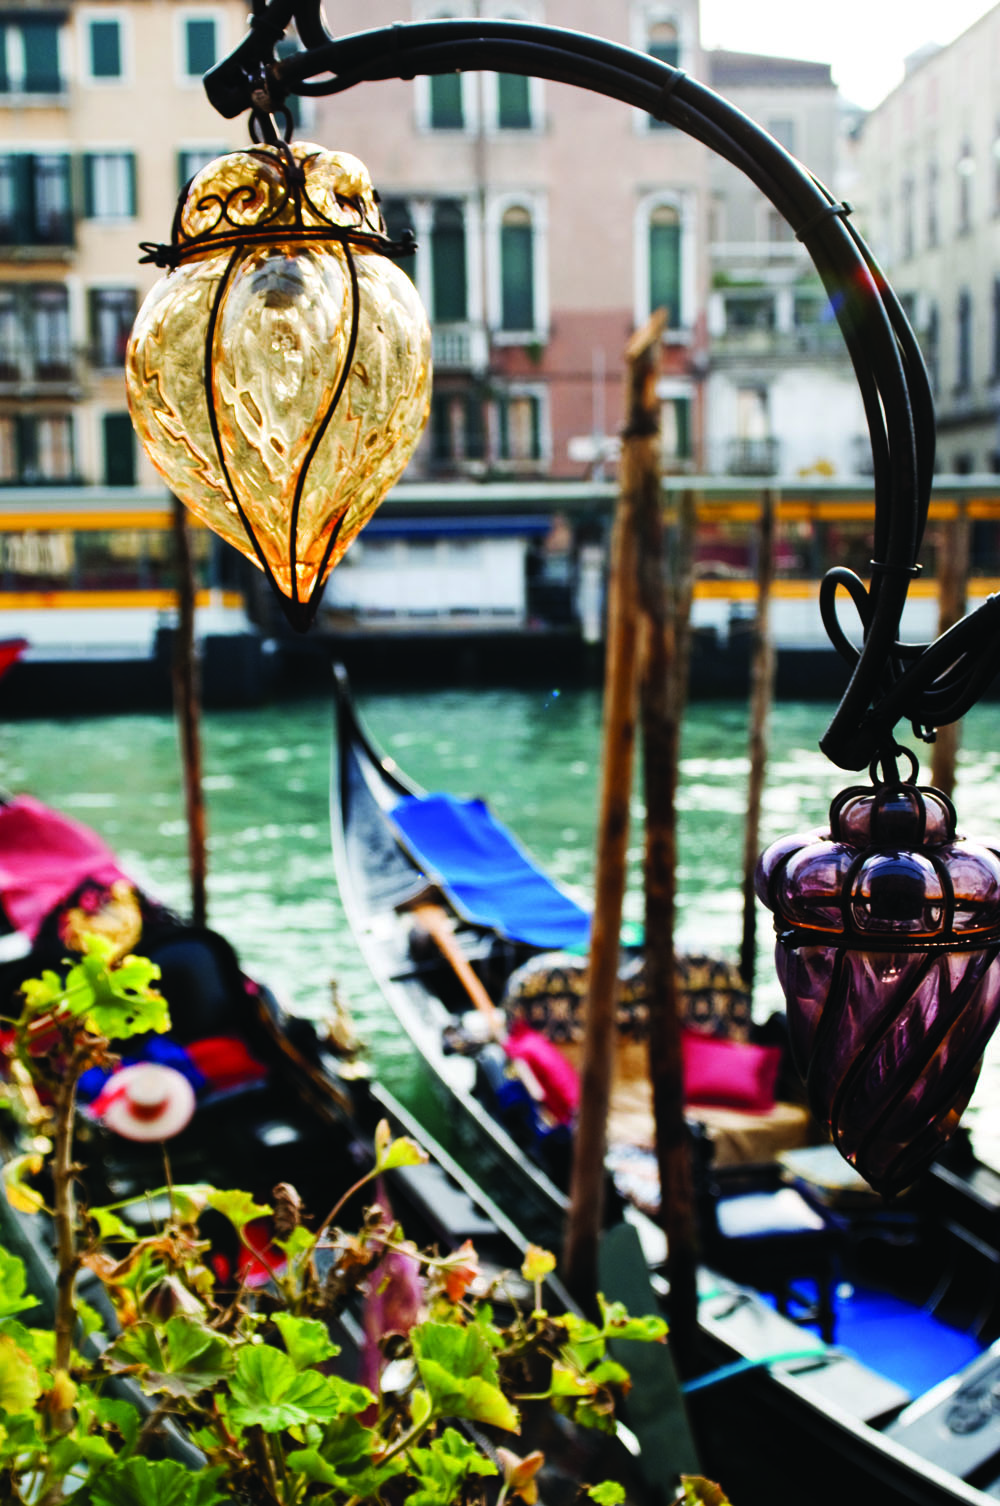 Typical Murano-made glass lamps along the Canal Grande, Venice